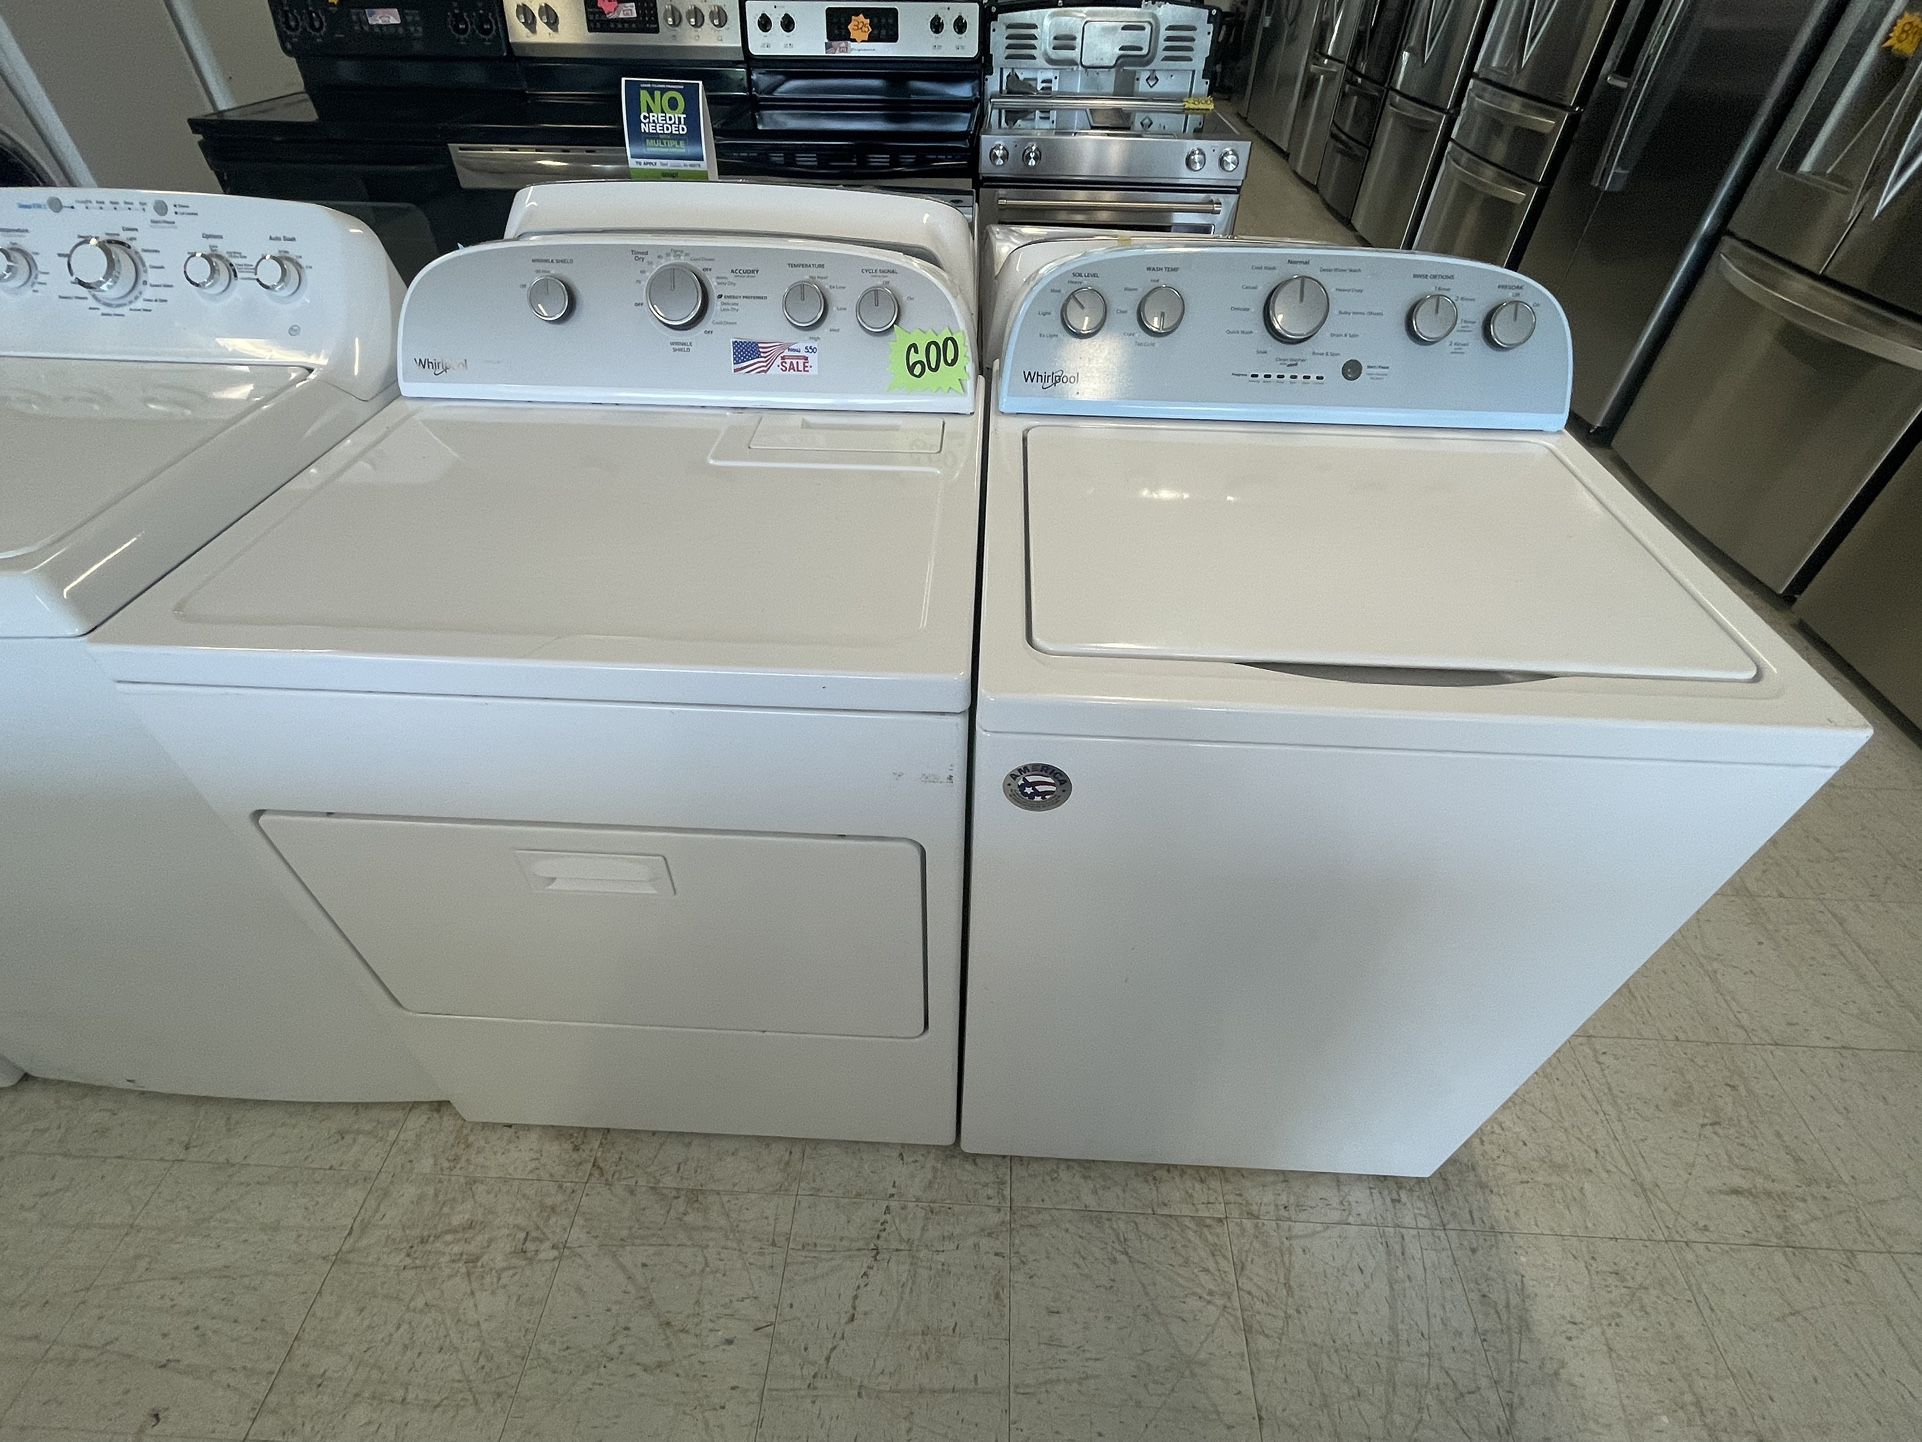 Whirlpool Top Load Washer And Electric Dryer Set Used In Good Condition With 90days Warranty 